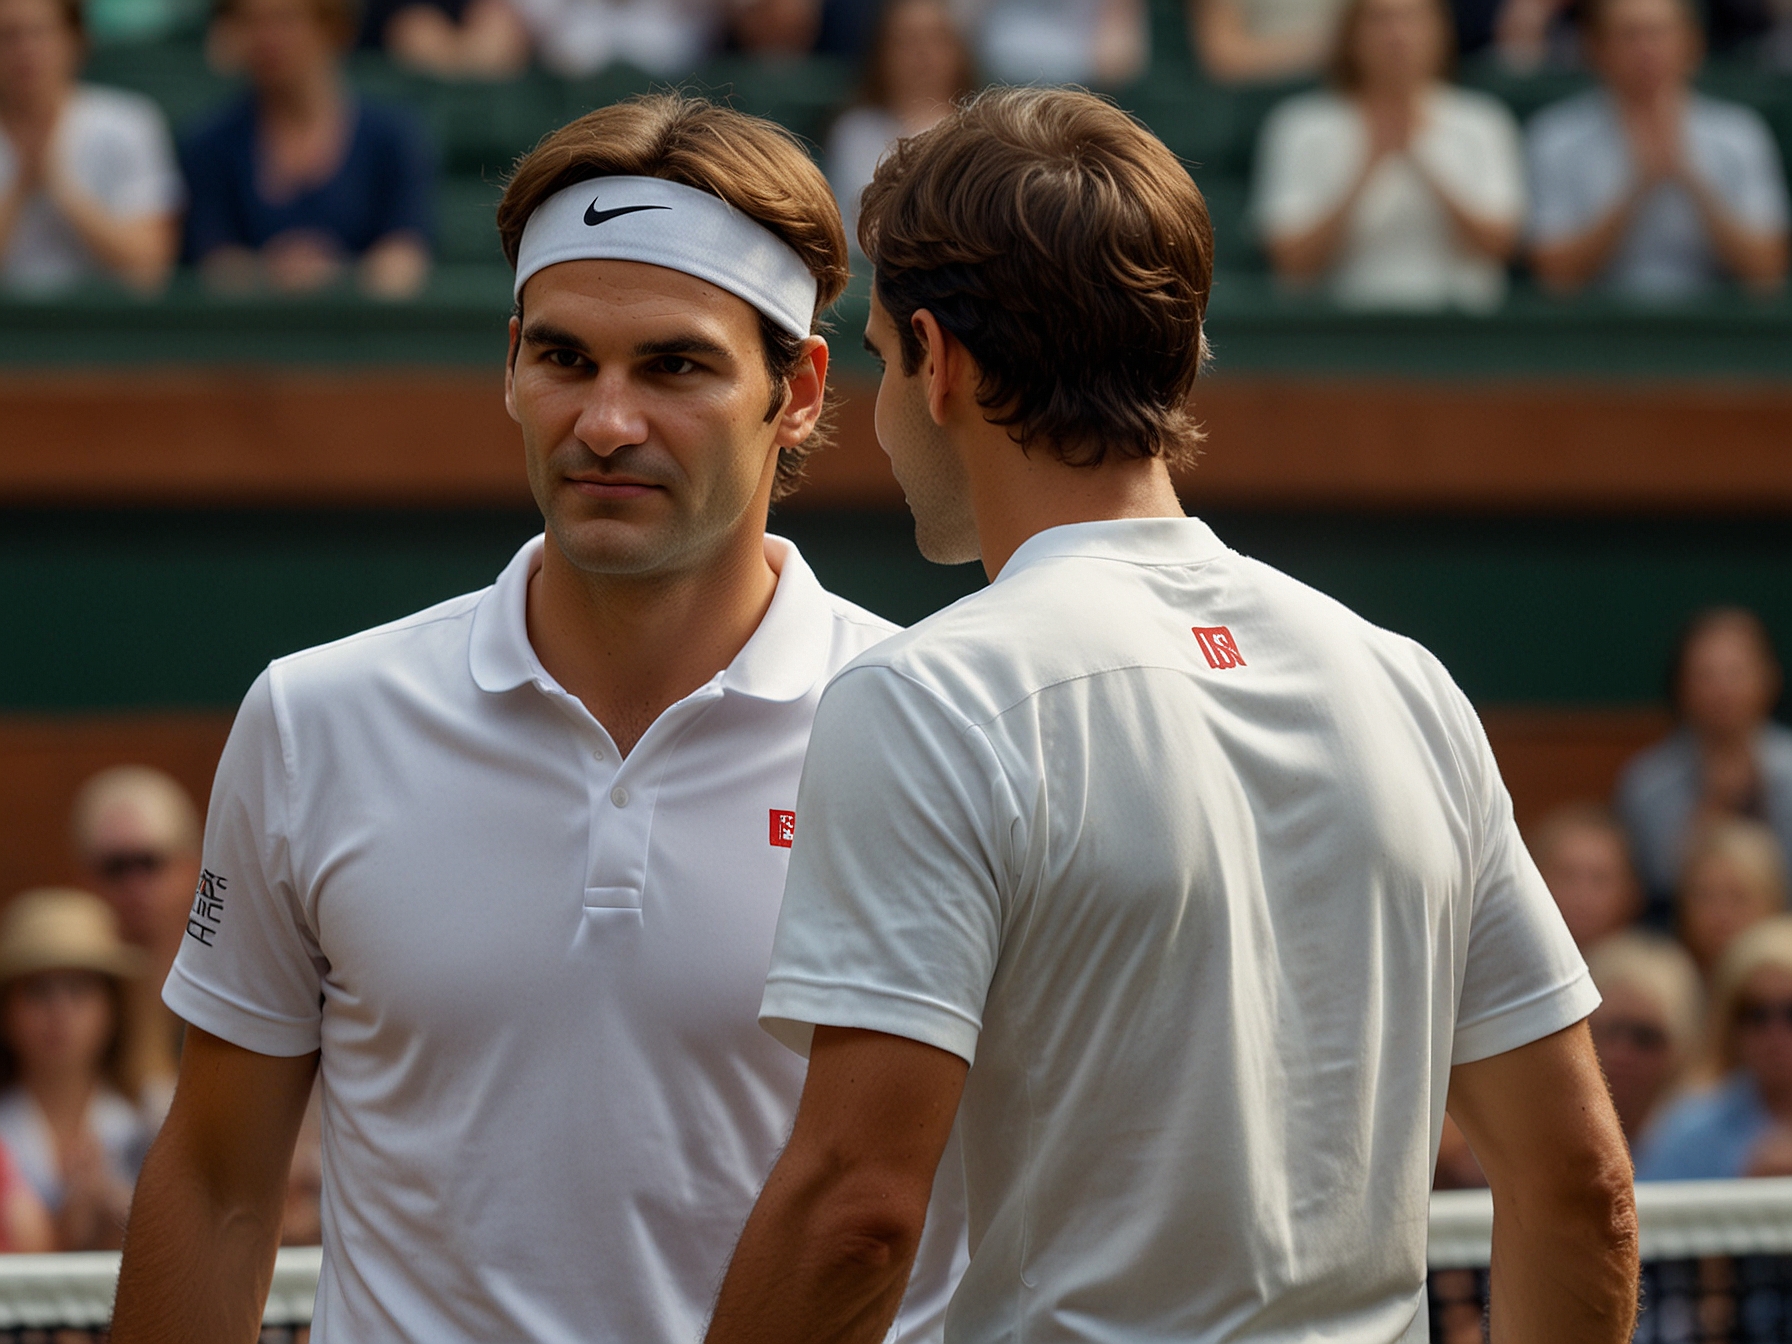 Illustration of Jannik Sinner and Roger Federer side-by-side, highlighting Sinner's calm demeanor and strategic gameplay, drawing parallels with Federer's legendary Wimbledon performances.